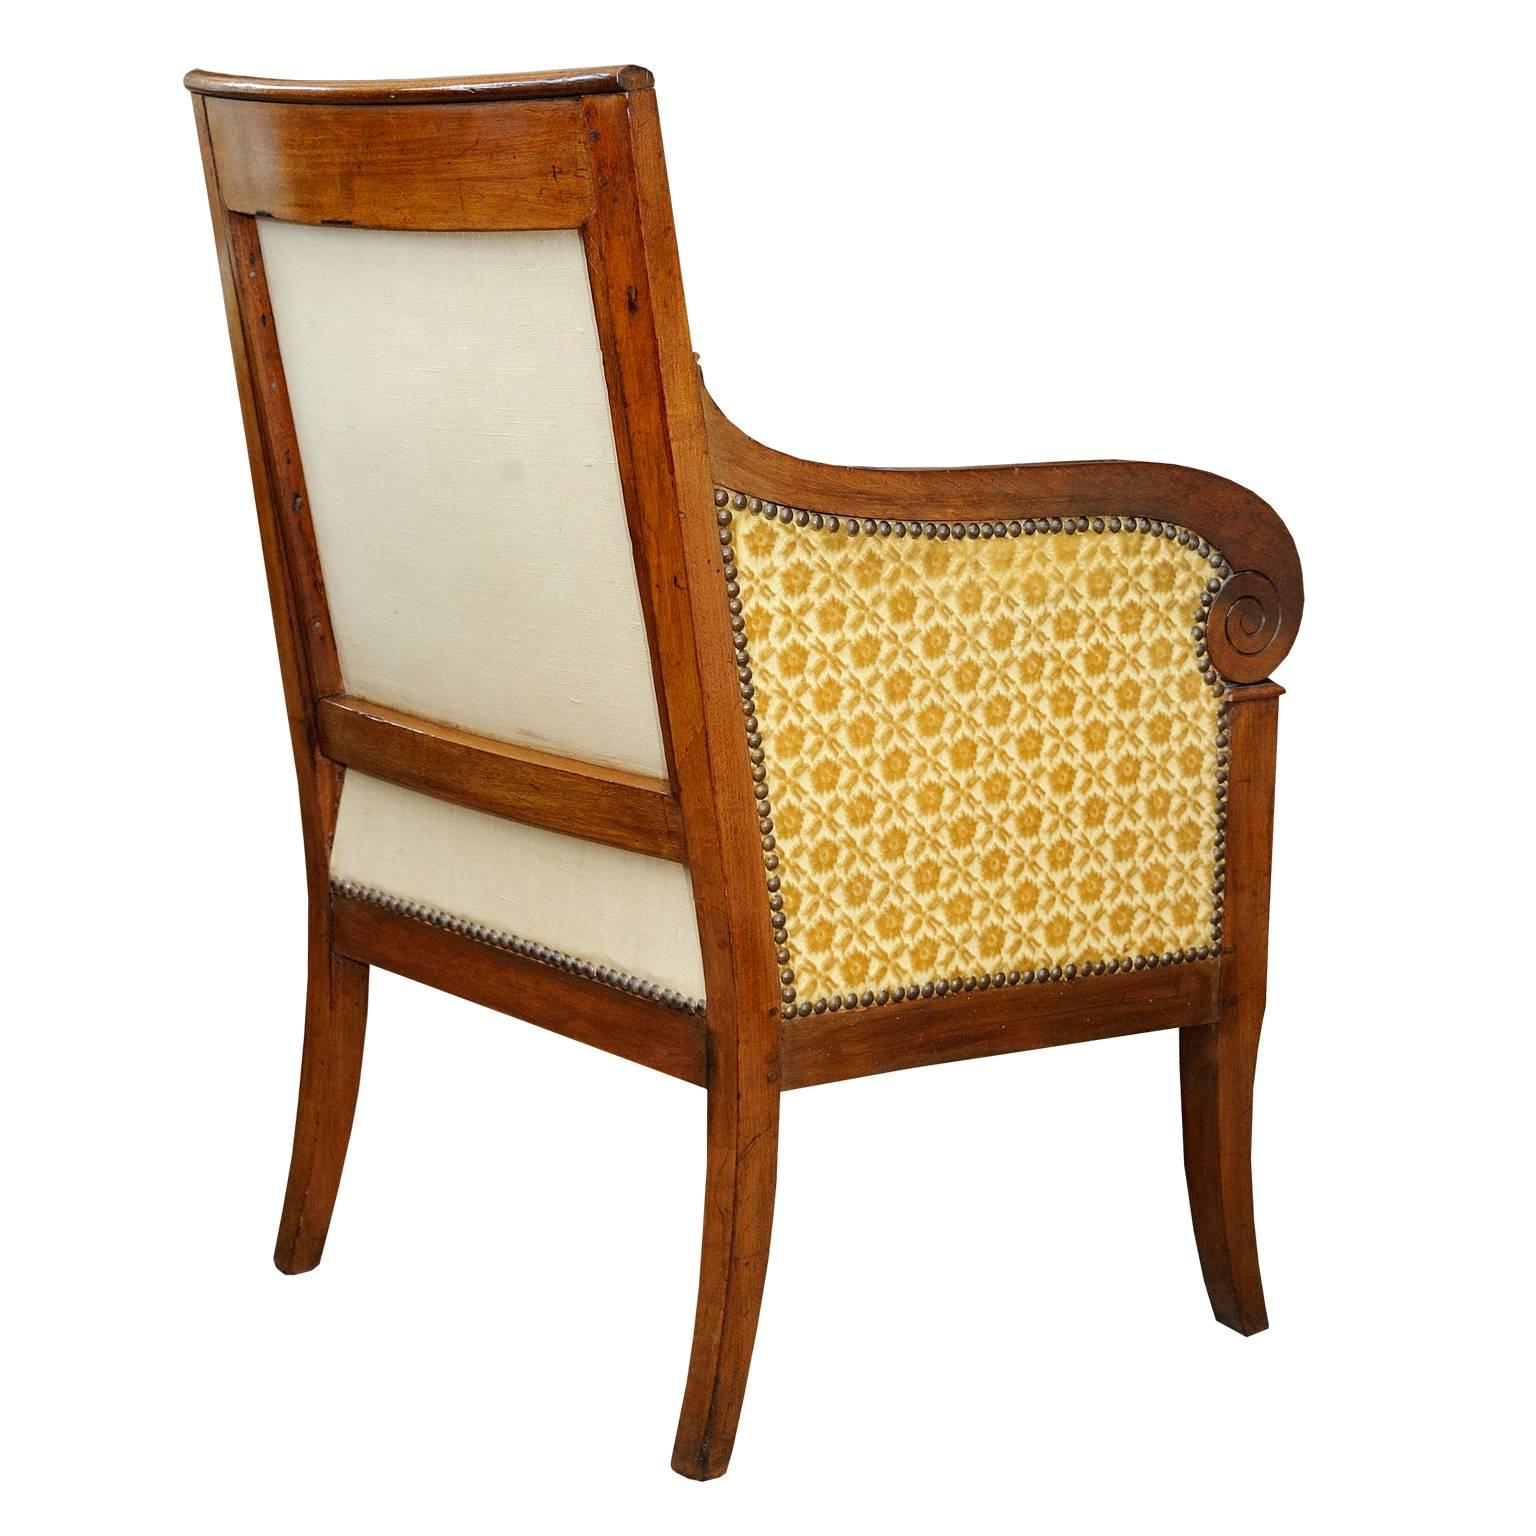 This is an elegant and very nicely proportioned French Empire mahogany bergere armchair with beautifully scrolled arms and detailed frontal carving,
circa 1820

